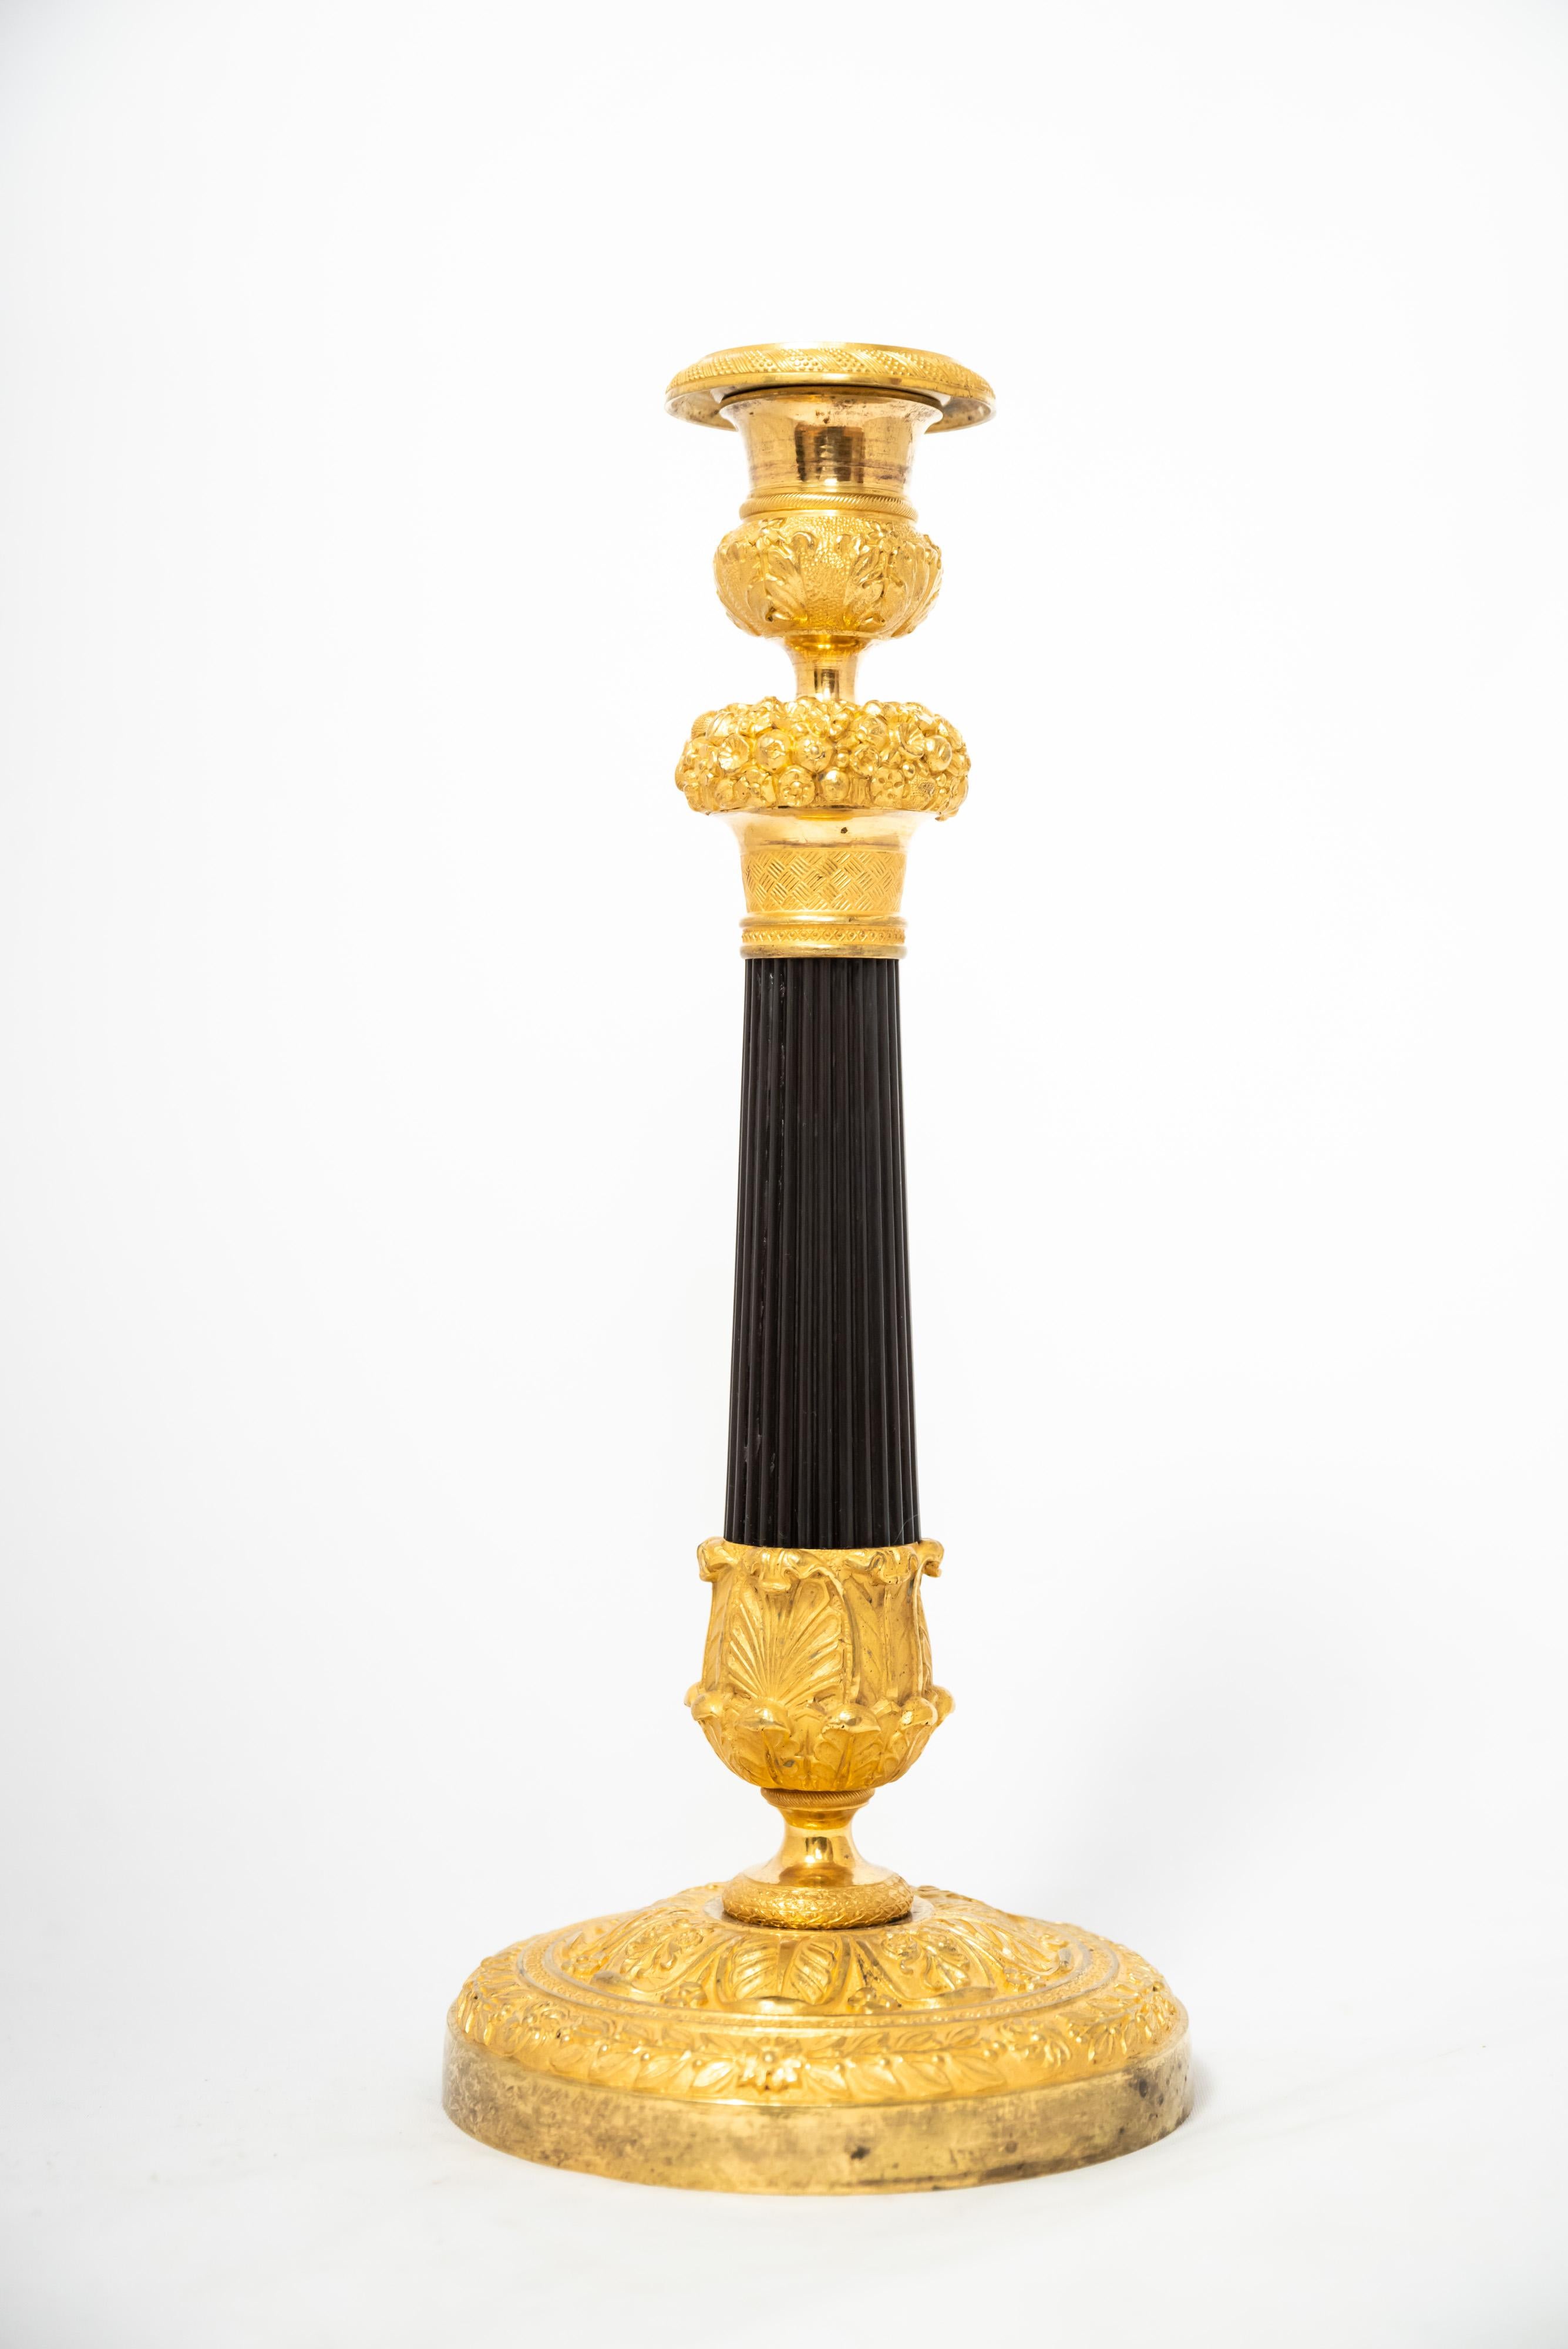 These candlesticks couldn’t be more emblematic of the Restauration Era. The maker has taken the classical attributes so fetishized under the Empire Style and supplemented them with neo-Rococo and neo-Gothic elements. You’d think this kind of